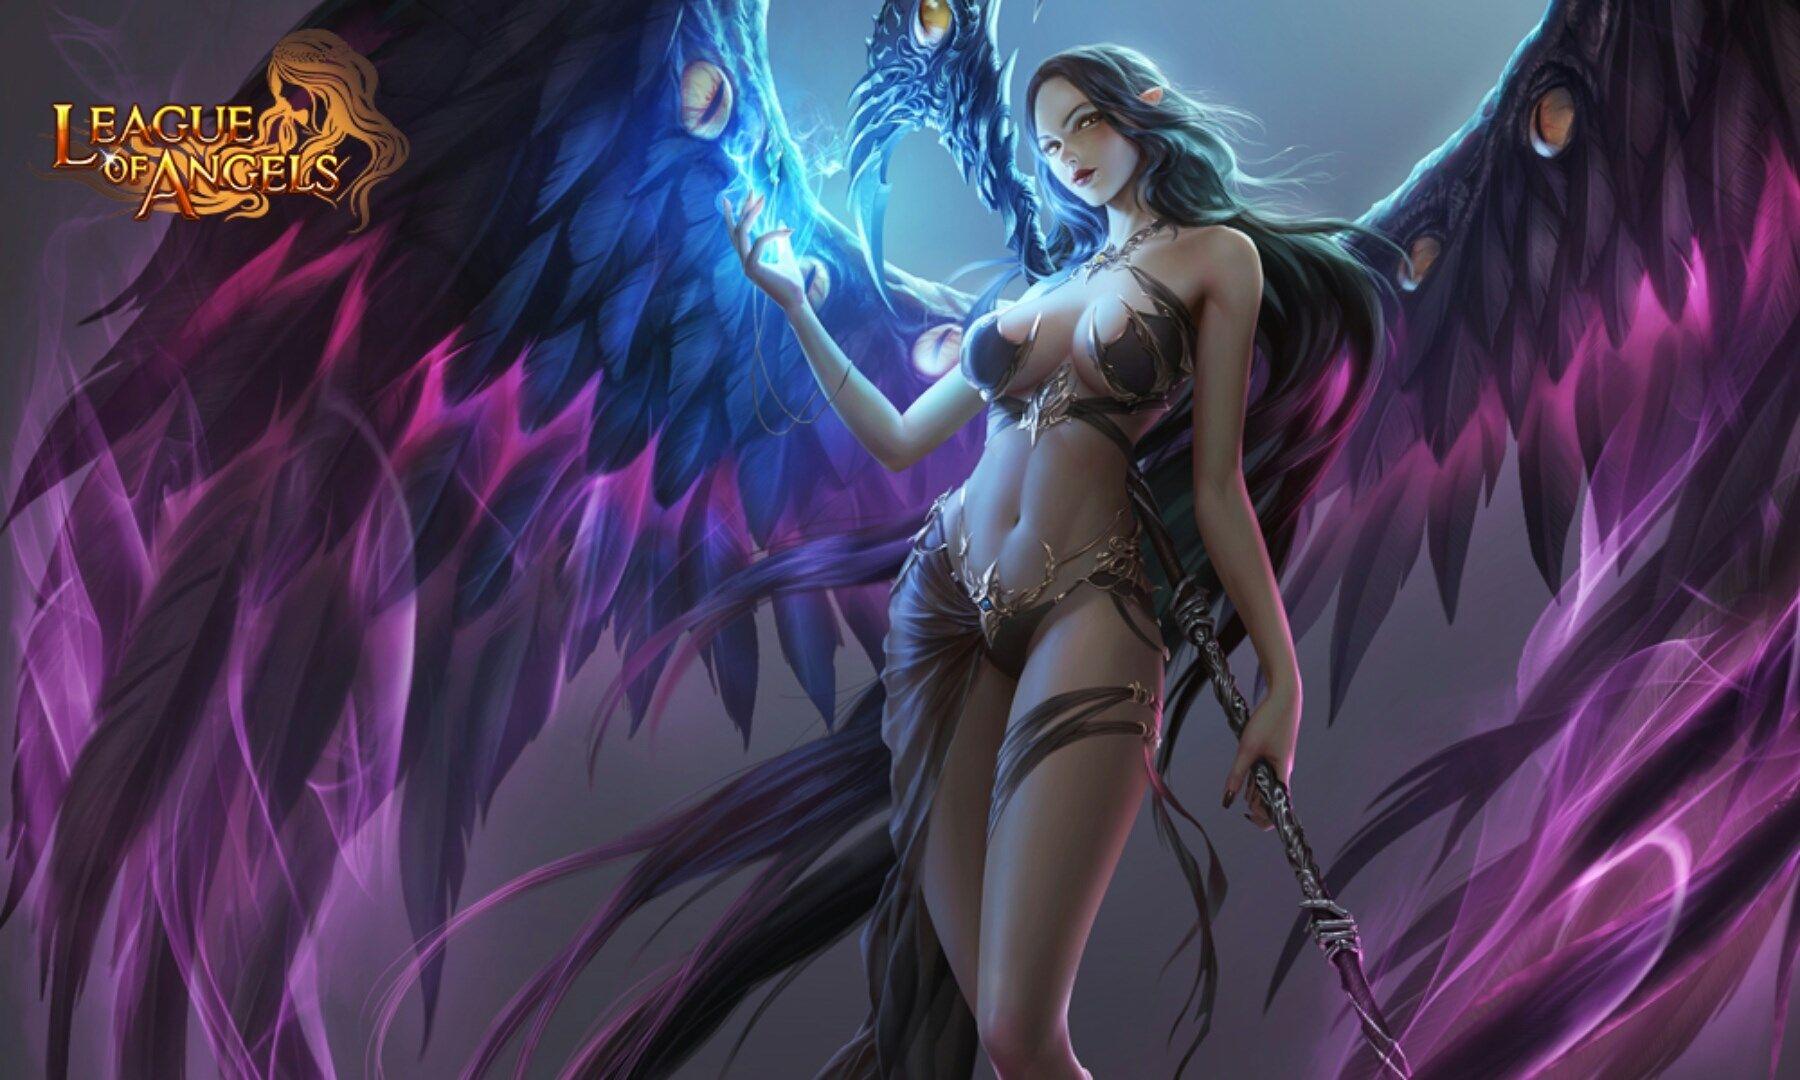 League of Angels III Wallpapers -Free to Play Browser MMORPG -F2P